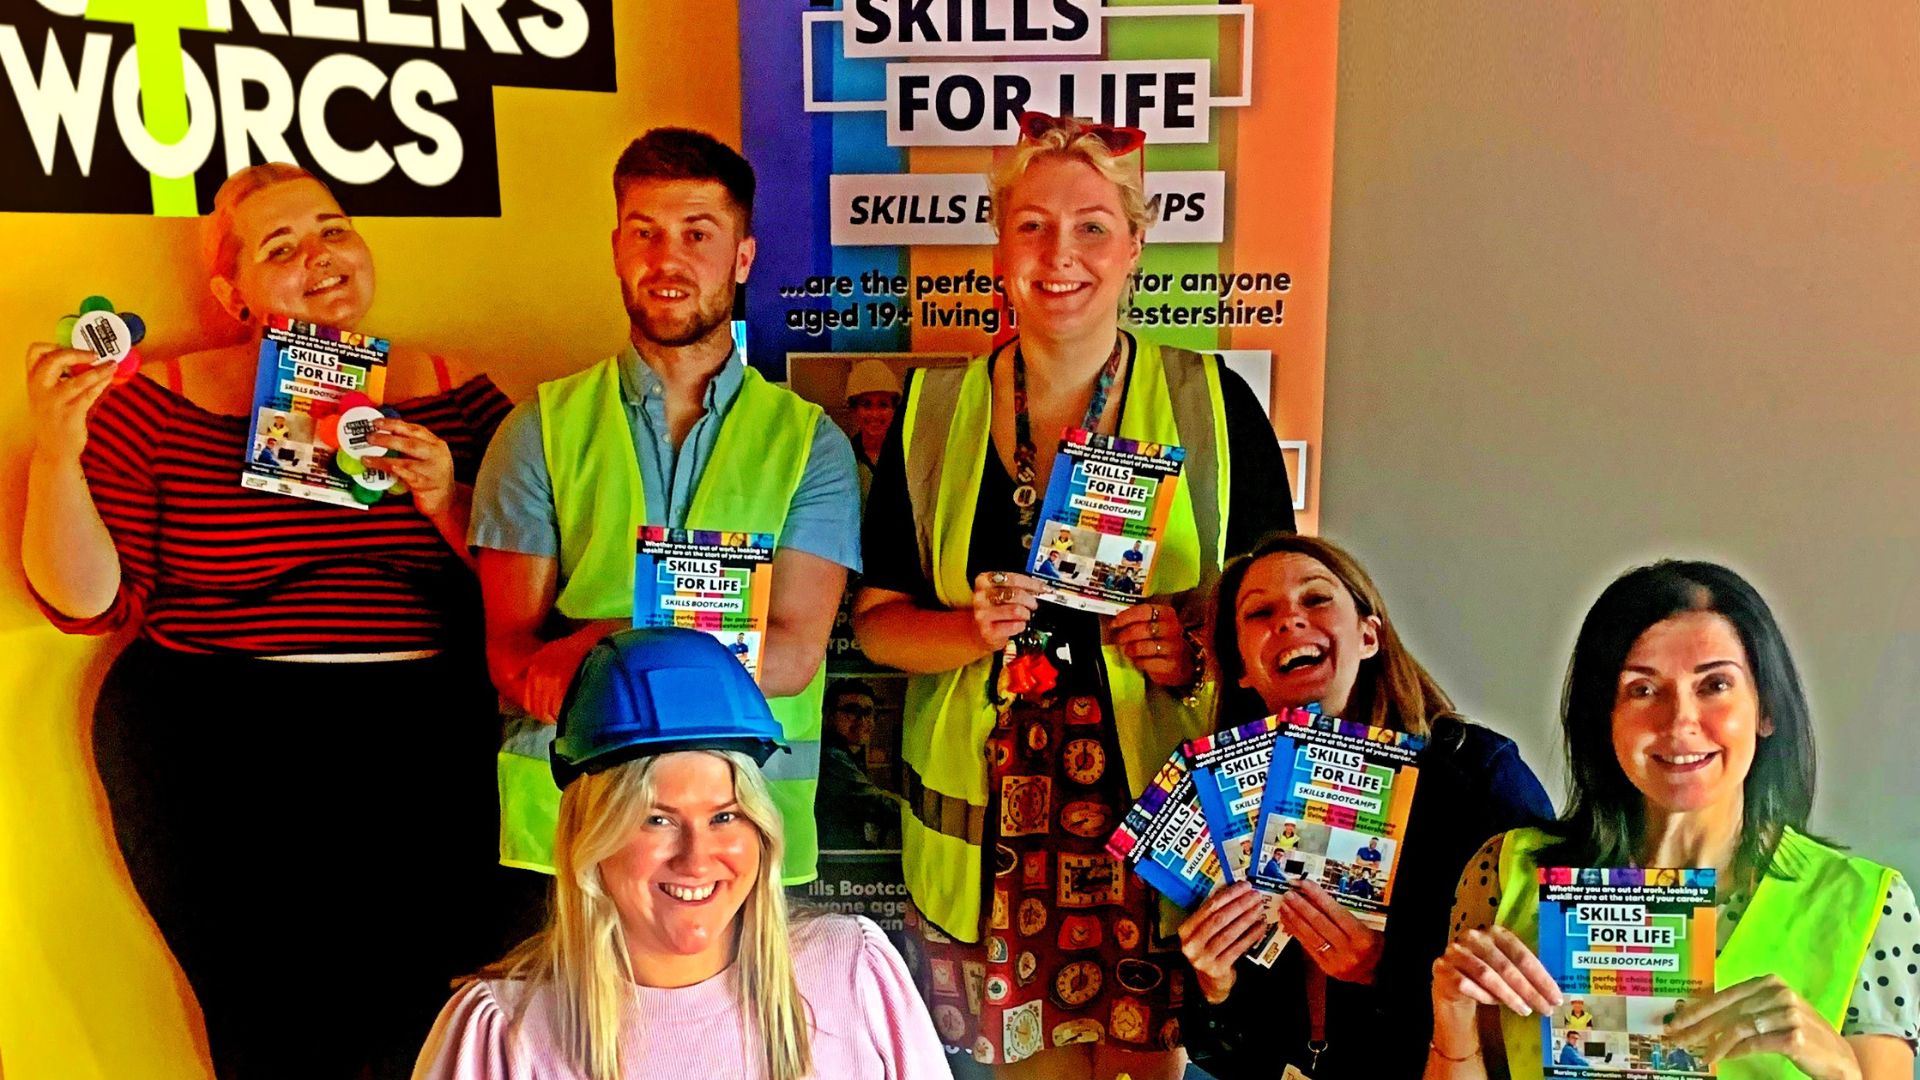 People hold skills bootcamps leaflets in front of a Careers Worcs banner